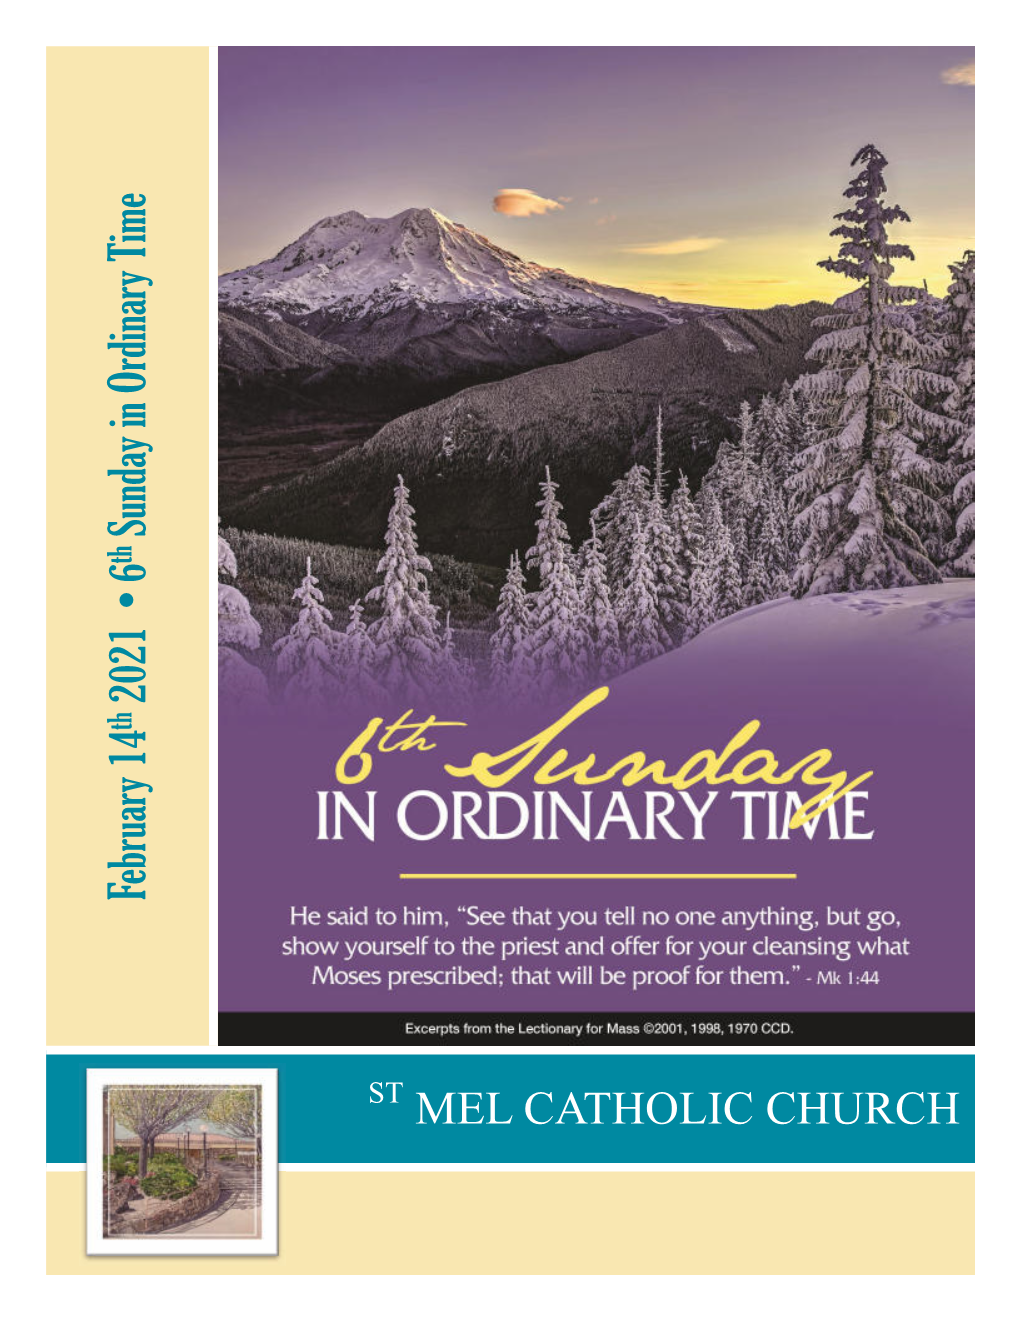 February 14 2021 • 6 Sunday in Ordinary Time